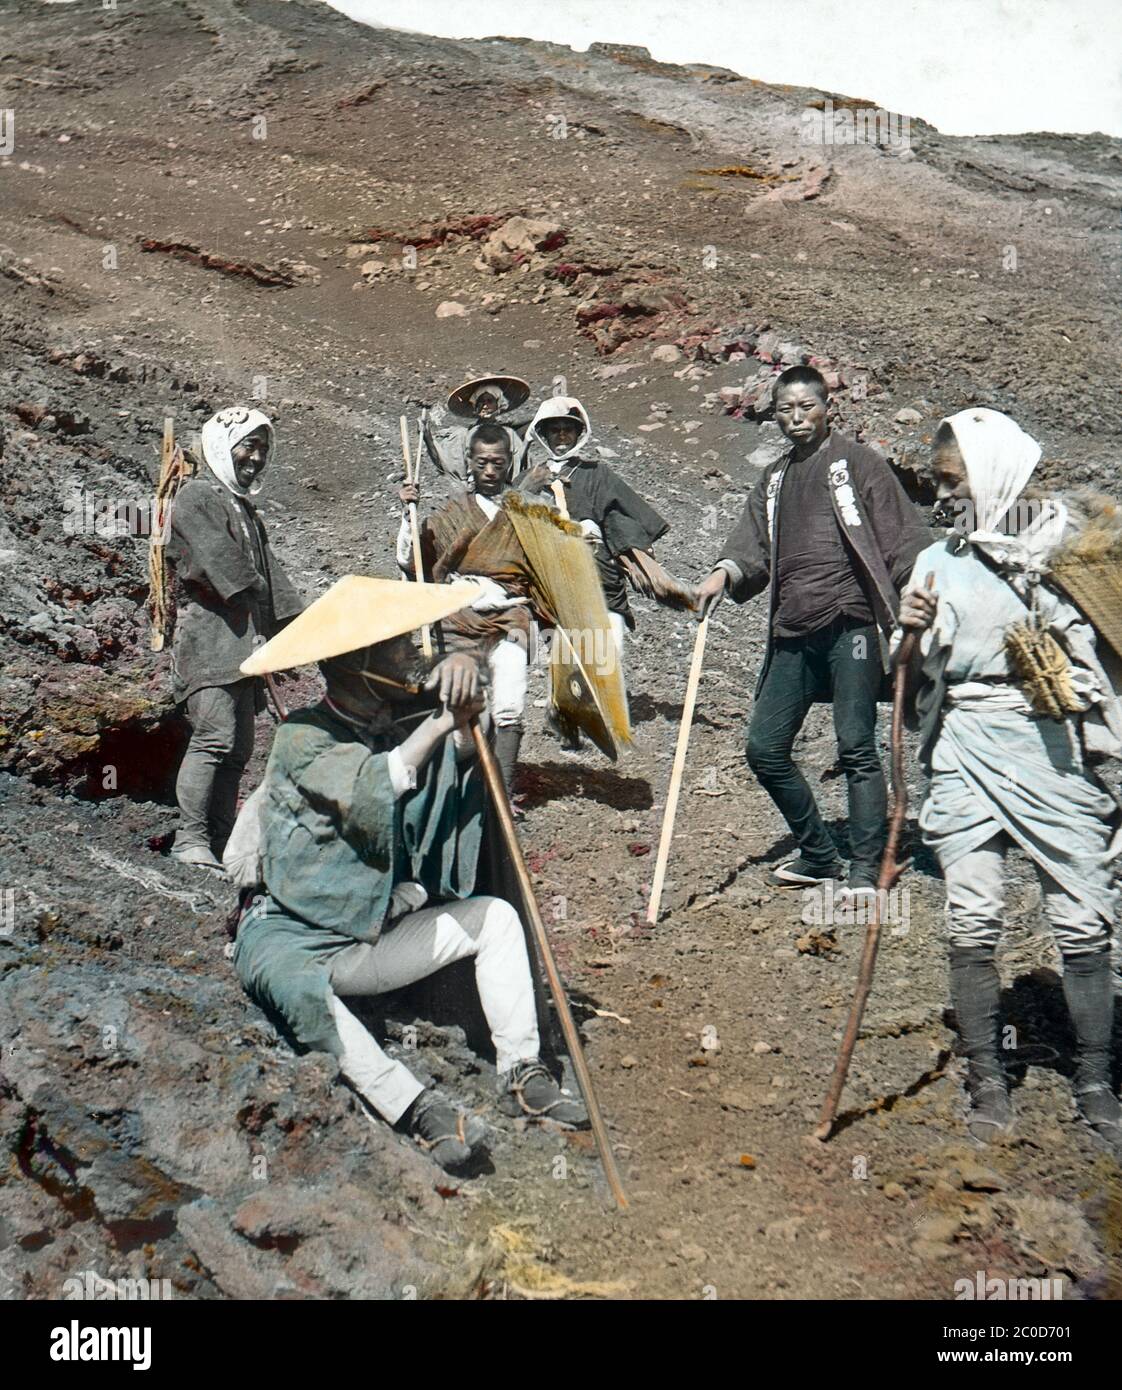 [ 1900s Japan - Mount Fuji Pilgrims ] — Pilgrims and their guide descent after climbing Mount Fuji.  20th century vintage glass slide. Stock Photo